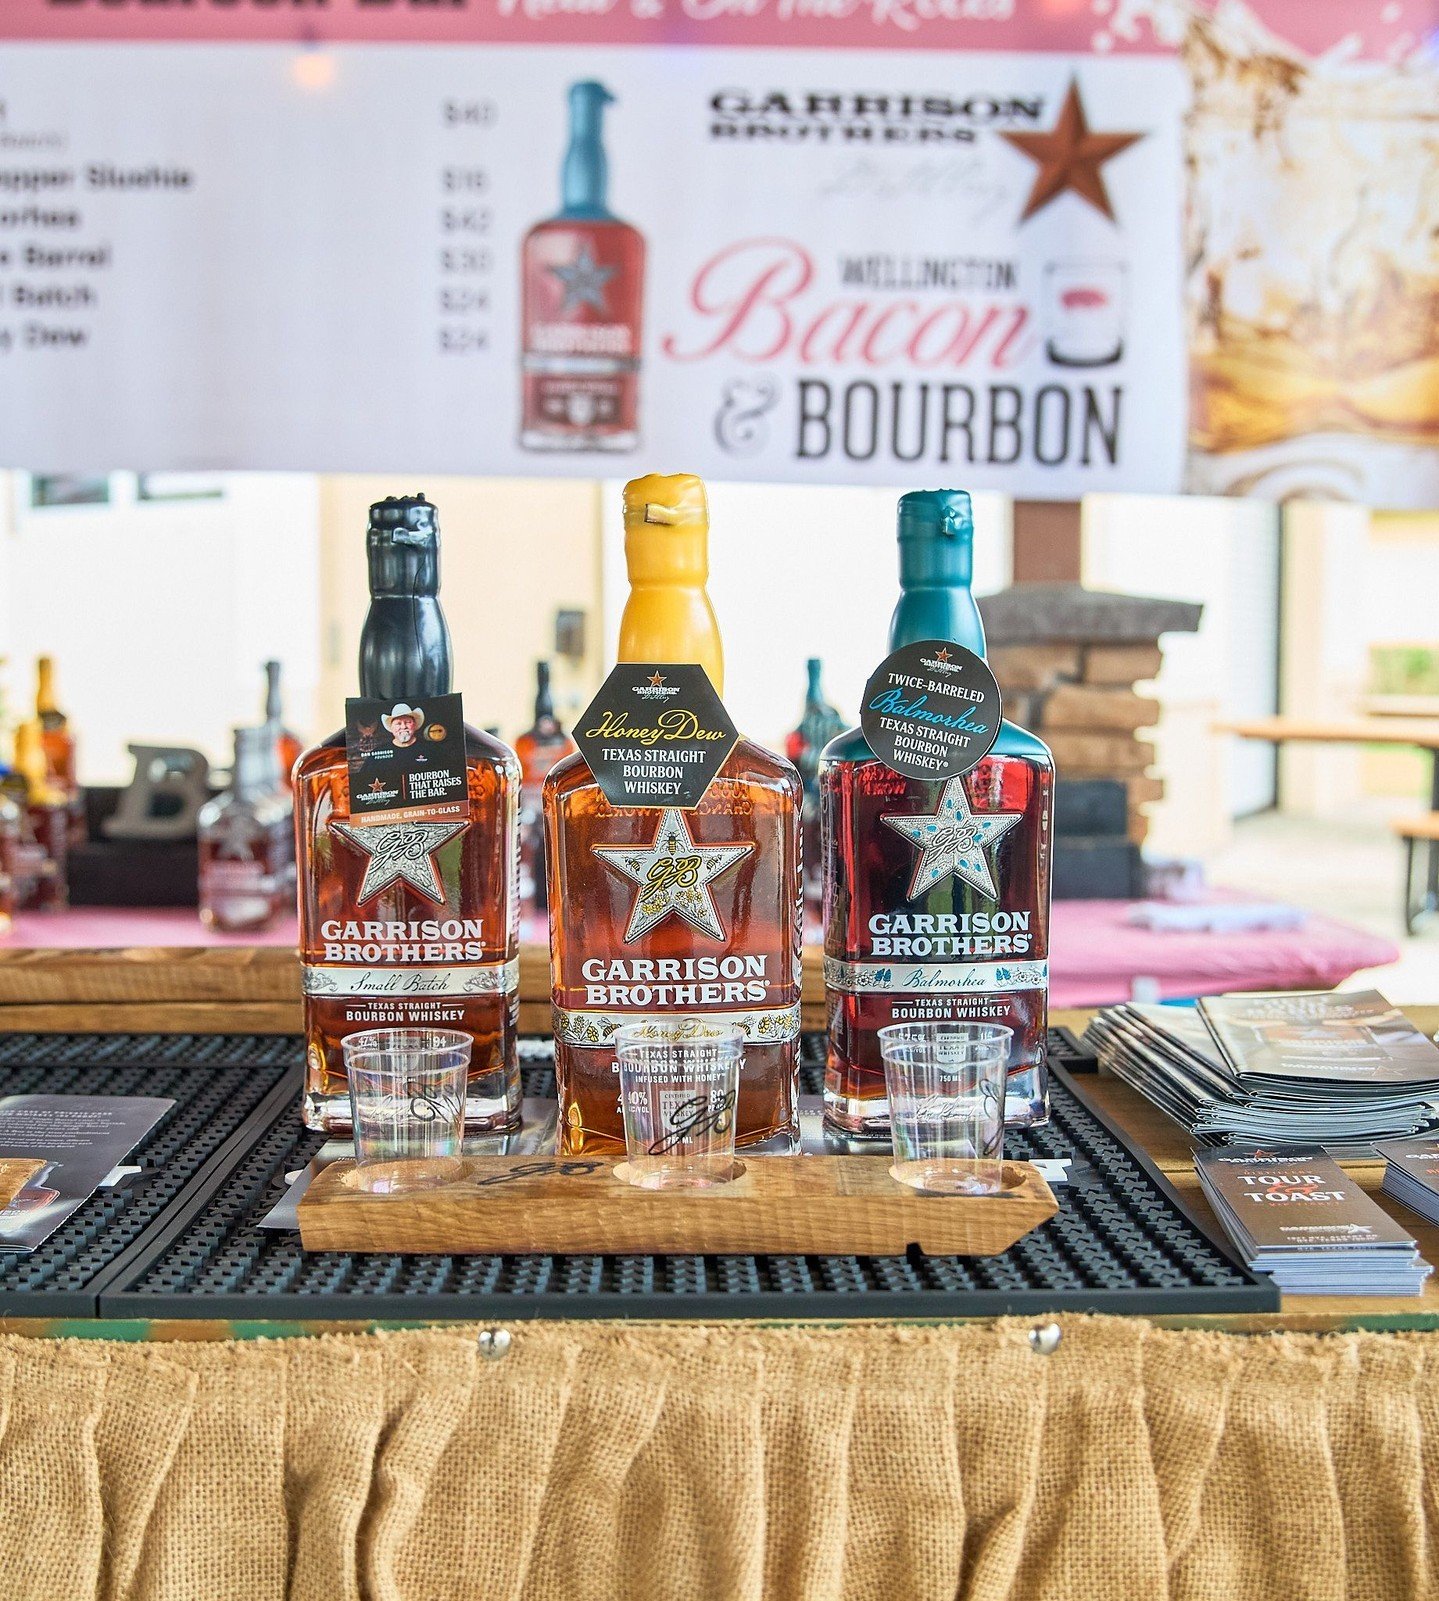 Some off the cuff product shots of @garrisonbros while shooting this years Bacon and Bourbon Fest in Wellington, FL 🥃 
.
.
.
📸 For Bacon and Bourbon Fest
👉 Have Event or Branding/Commercial photography needs? Let's connect and see how I can help!
